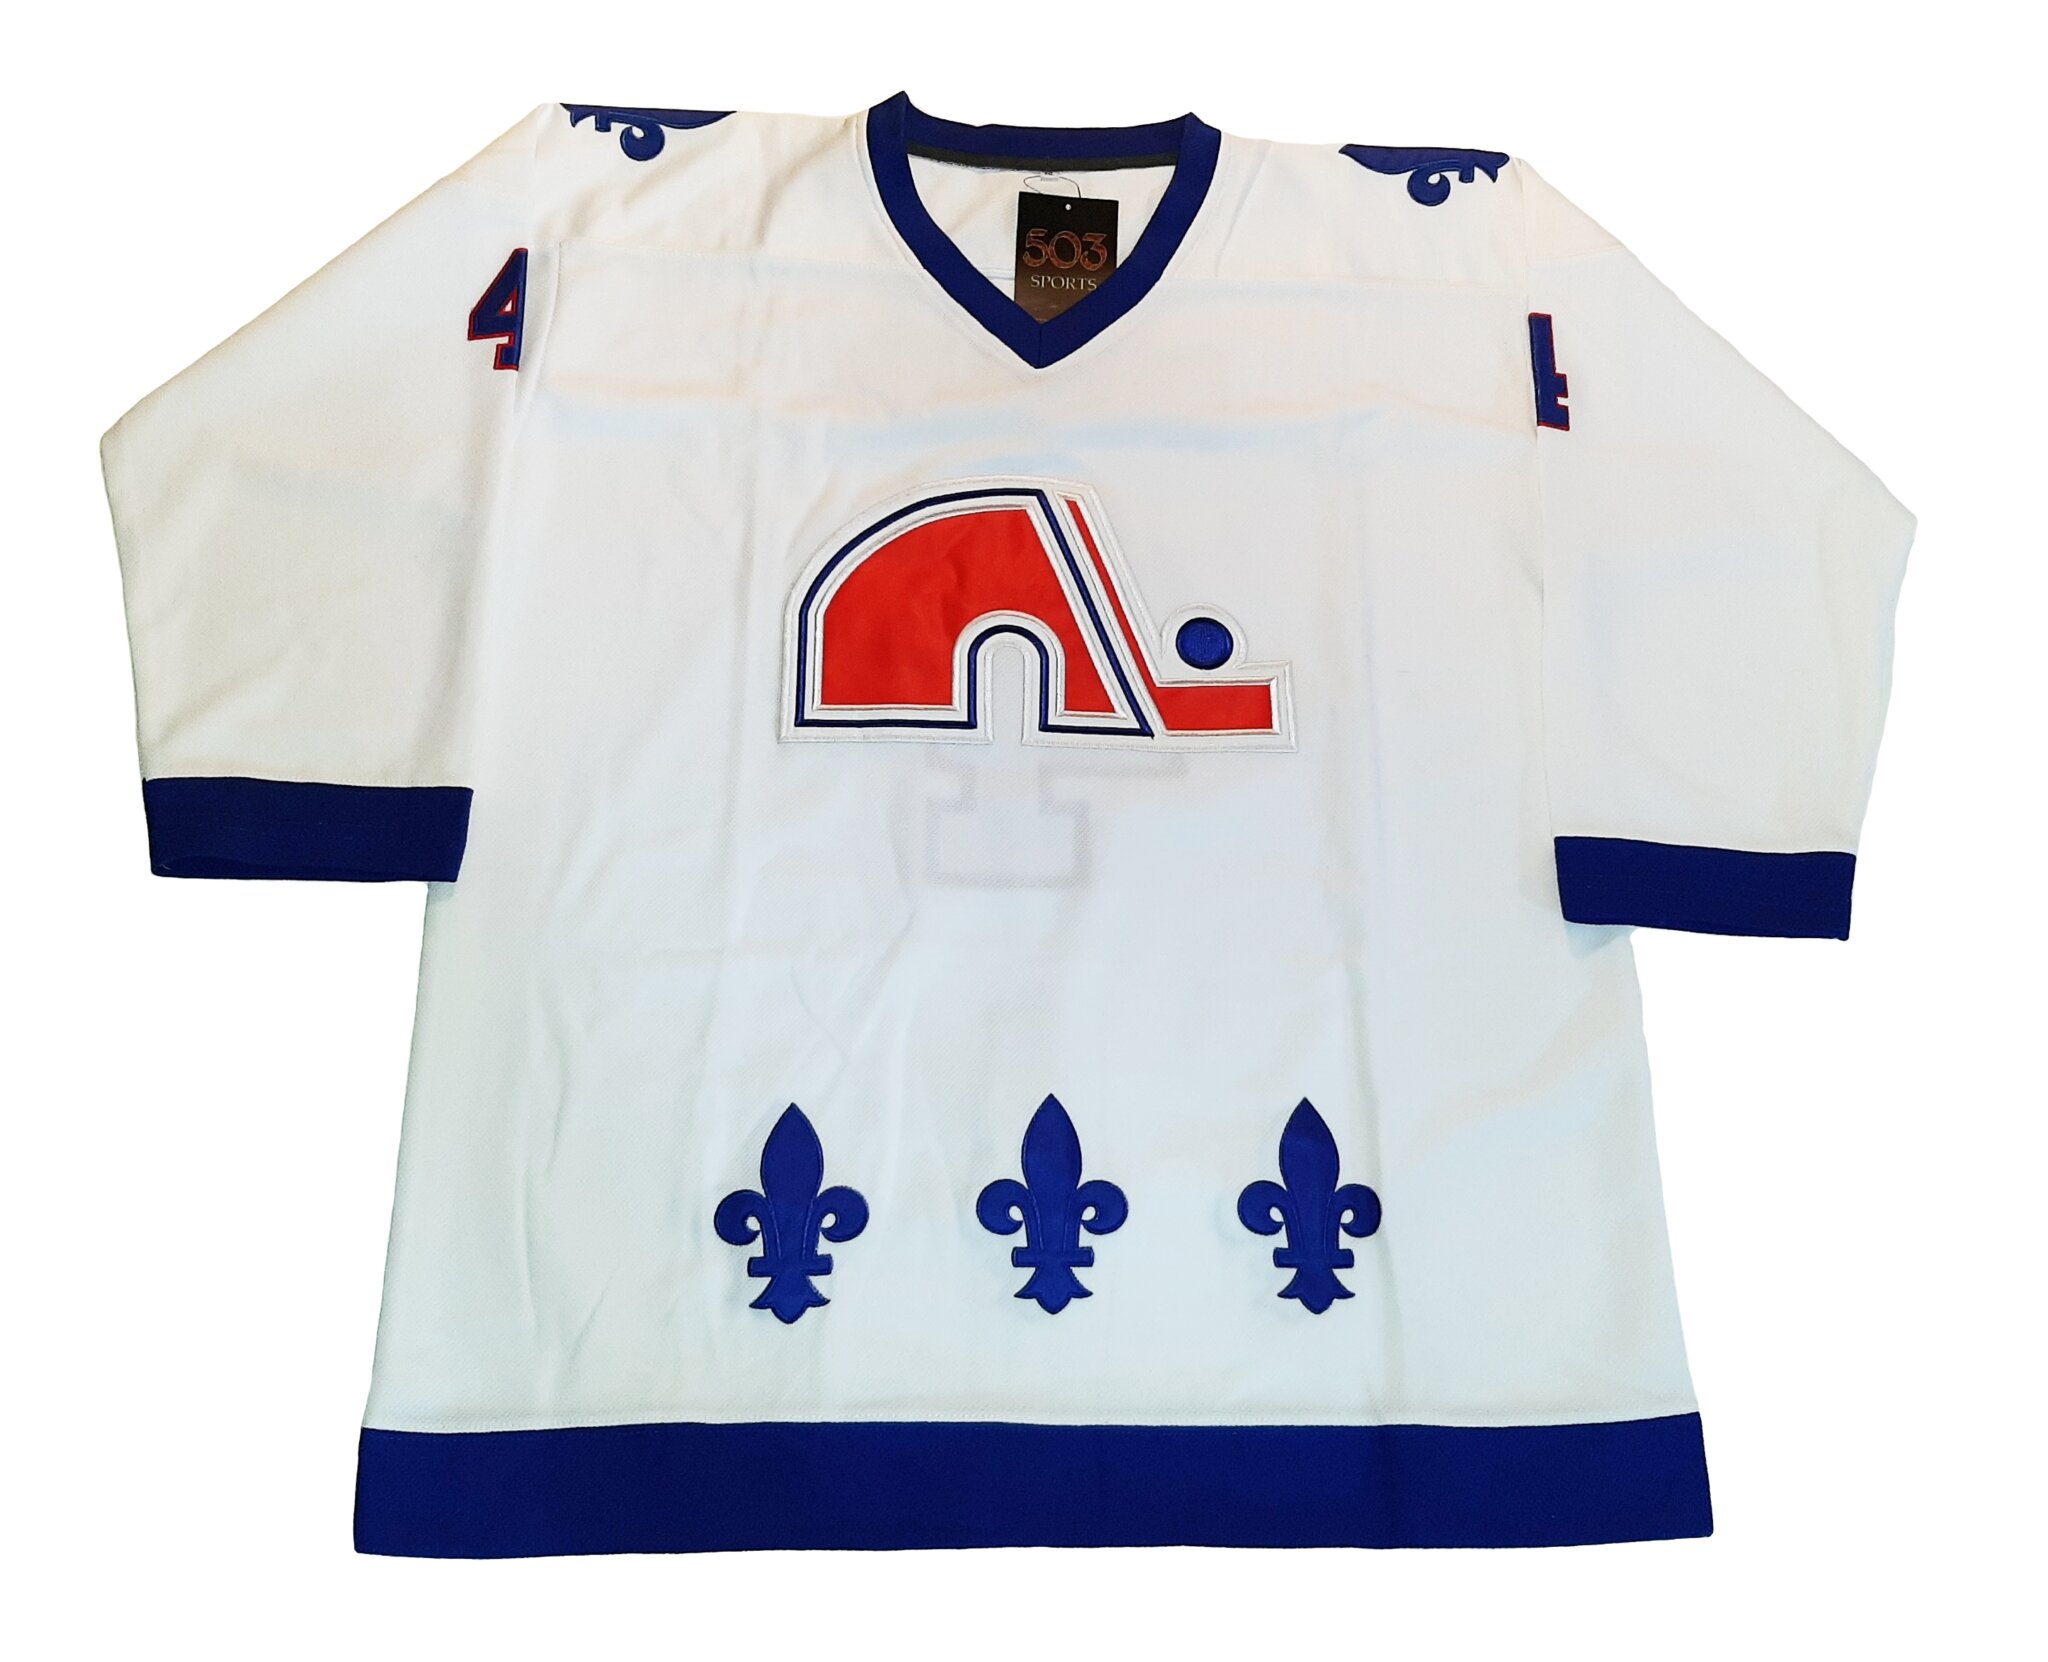 nordiques_white_jersey_front_1024x1024@2x.png.jpg